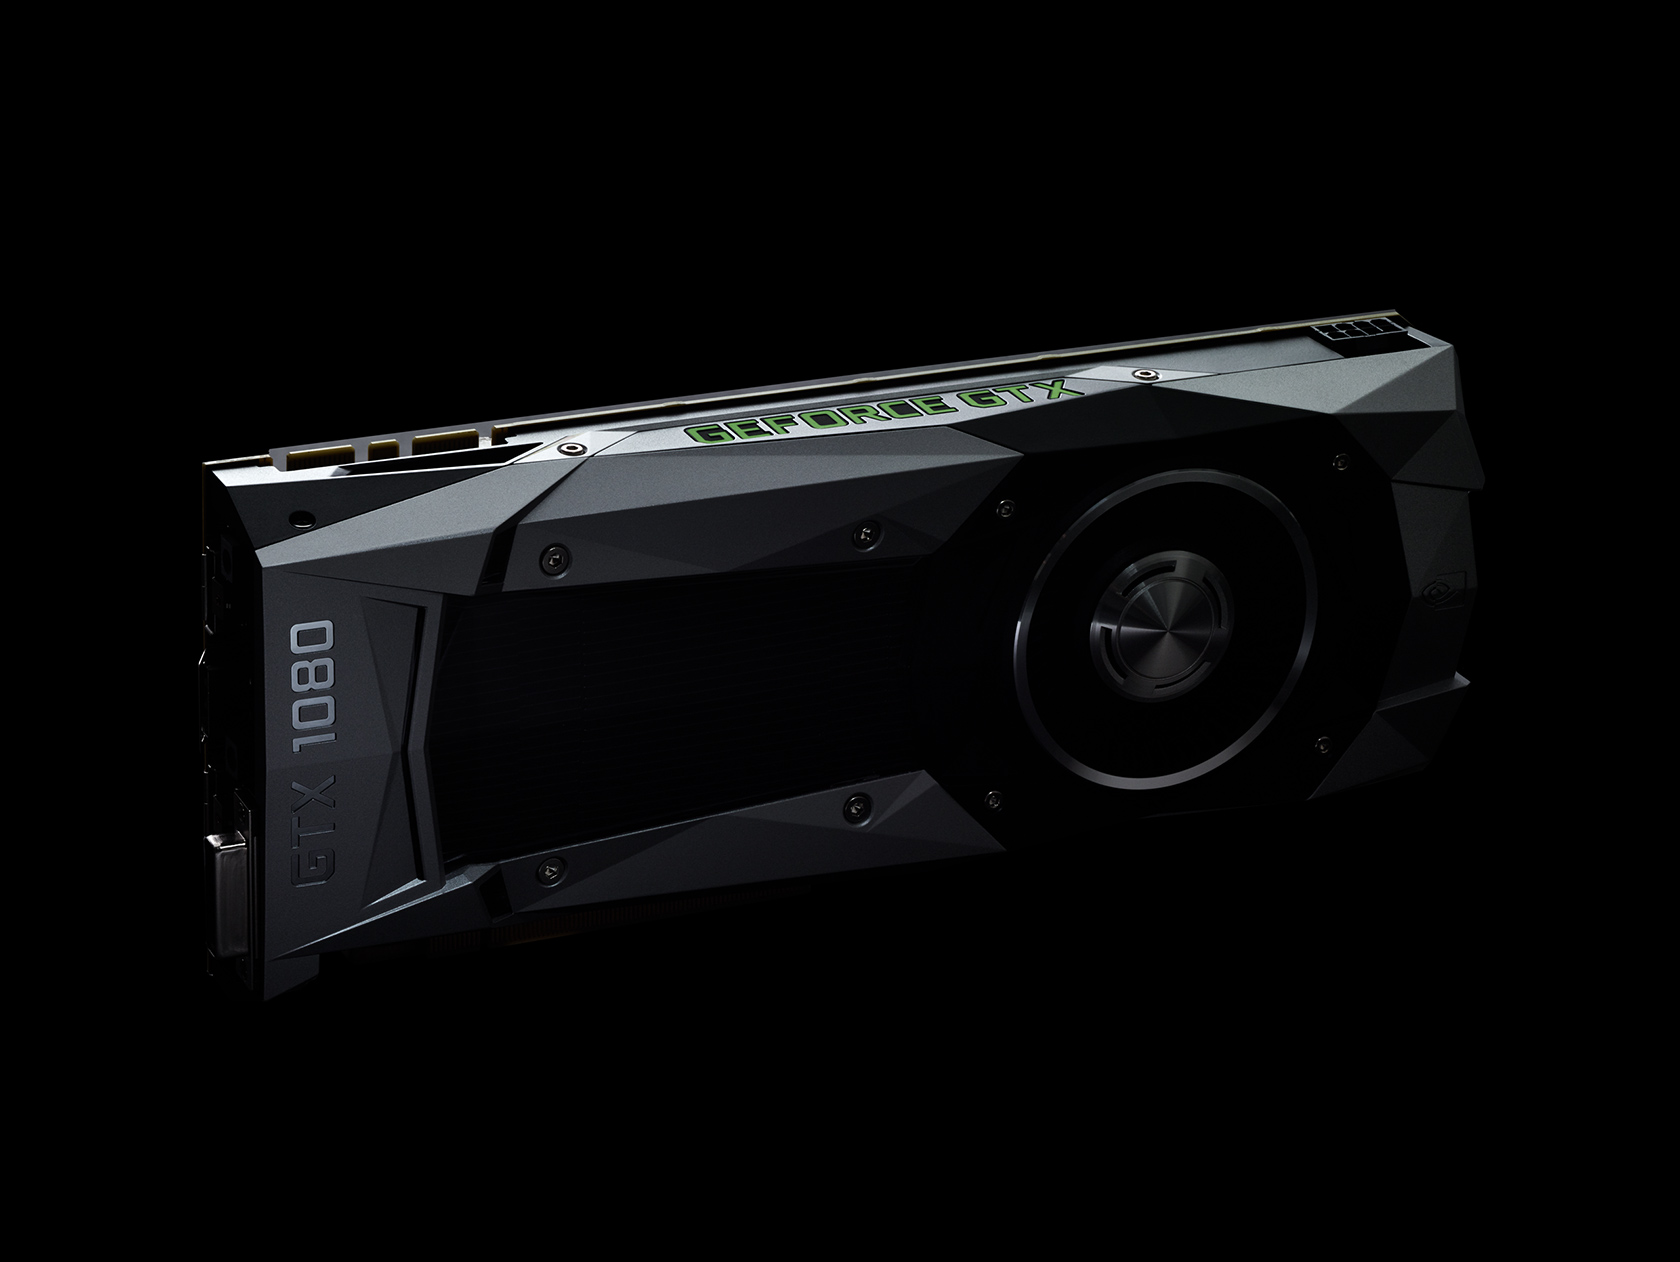 Media asset (photo, screenshot, or image in full size) related to contents posted at 3dfxzone.it | Image Name: news24229-NVIDIA-GeForce-GTX-1080_5.jpg